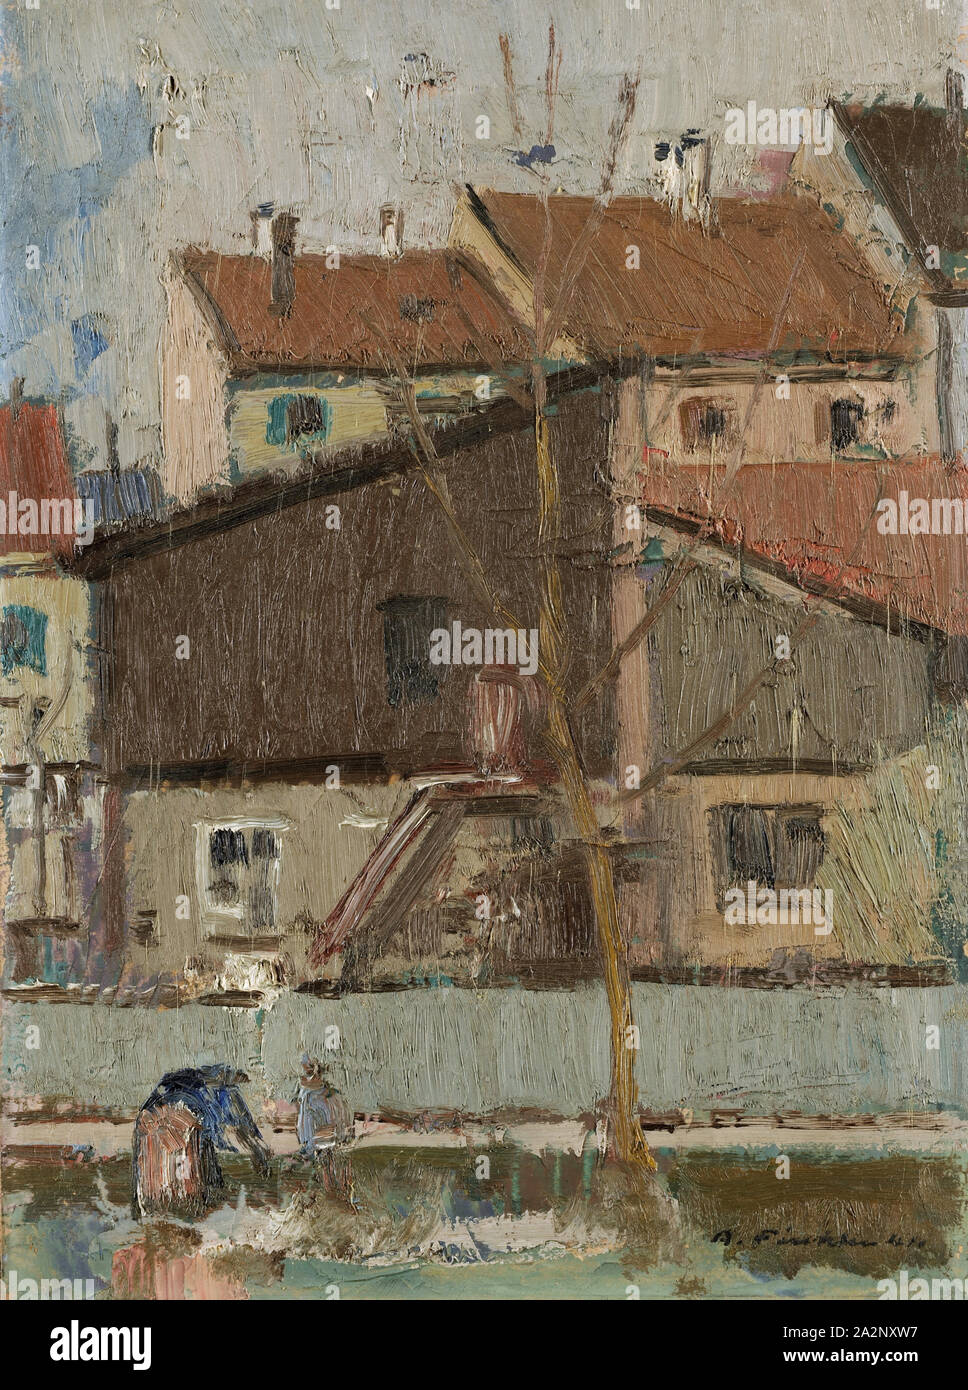 Studio Lookout, 1941, oil on board, 35 x 25.5 cm, signed and dated lower right: A. Fiechter 41. [last digit hard to read], Arnold Fiechter, Sissach/Baselland 1879–1943 Basel Stock Photo